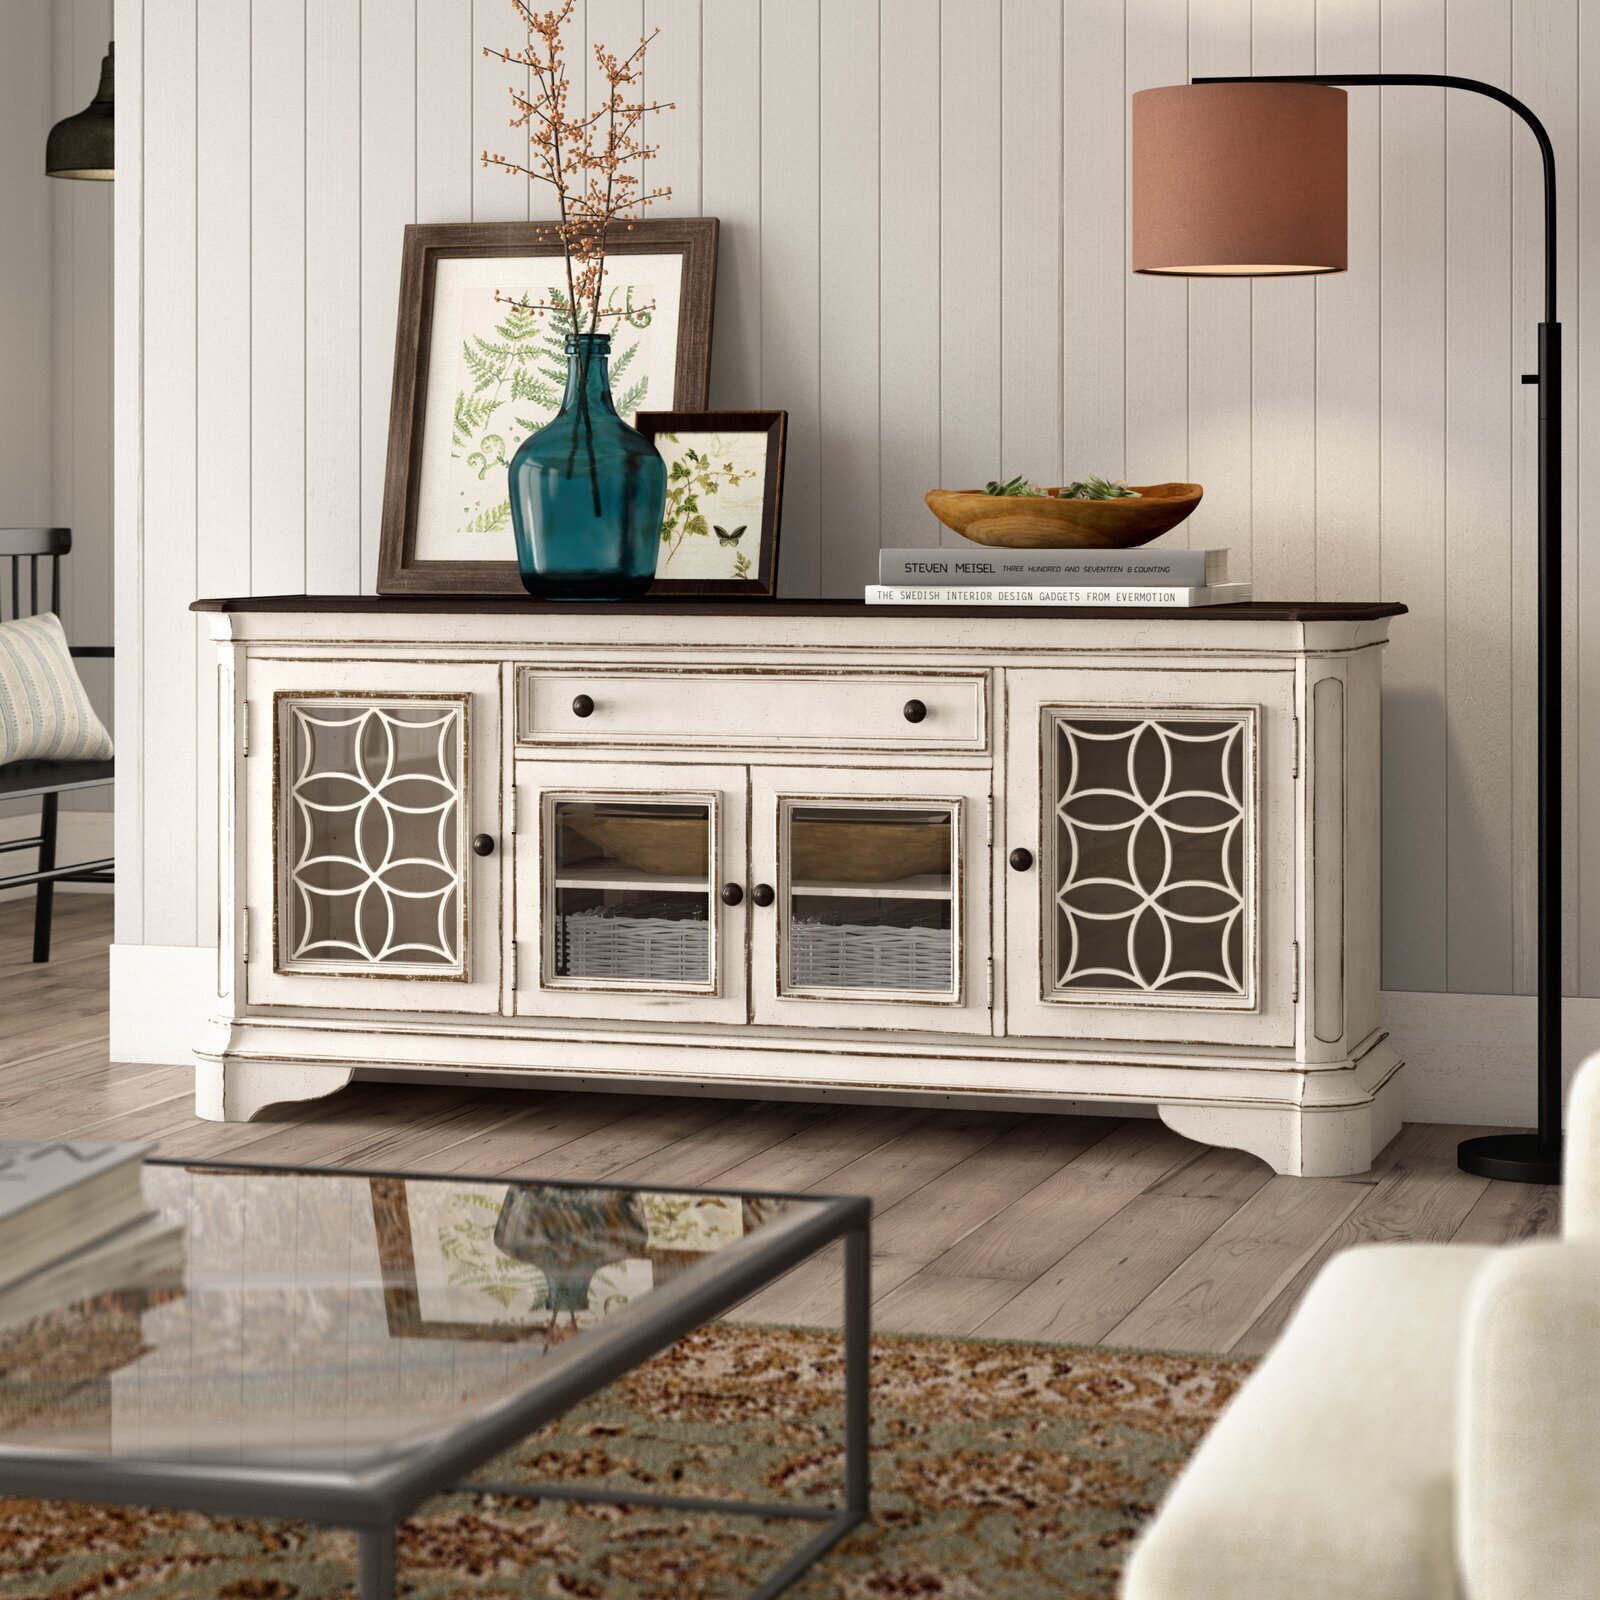 Television cabinet with detailed glass doors